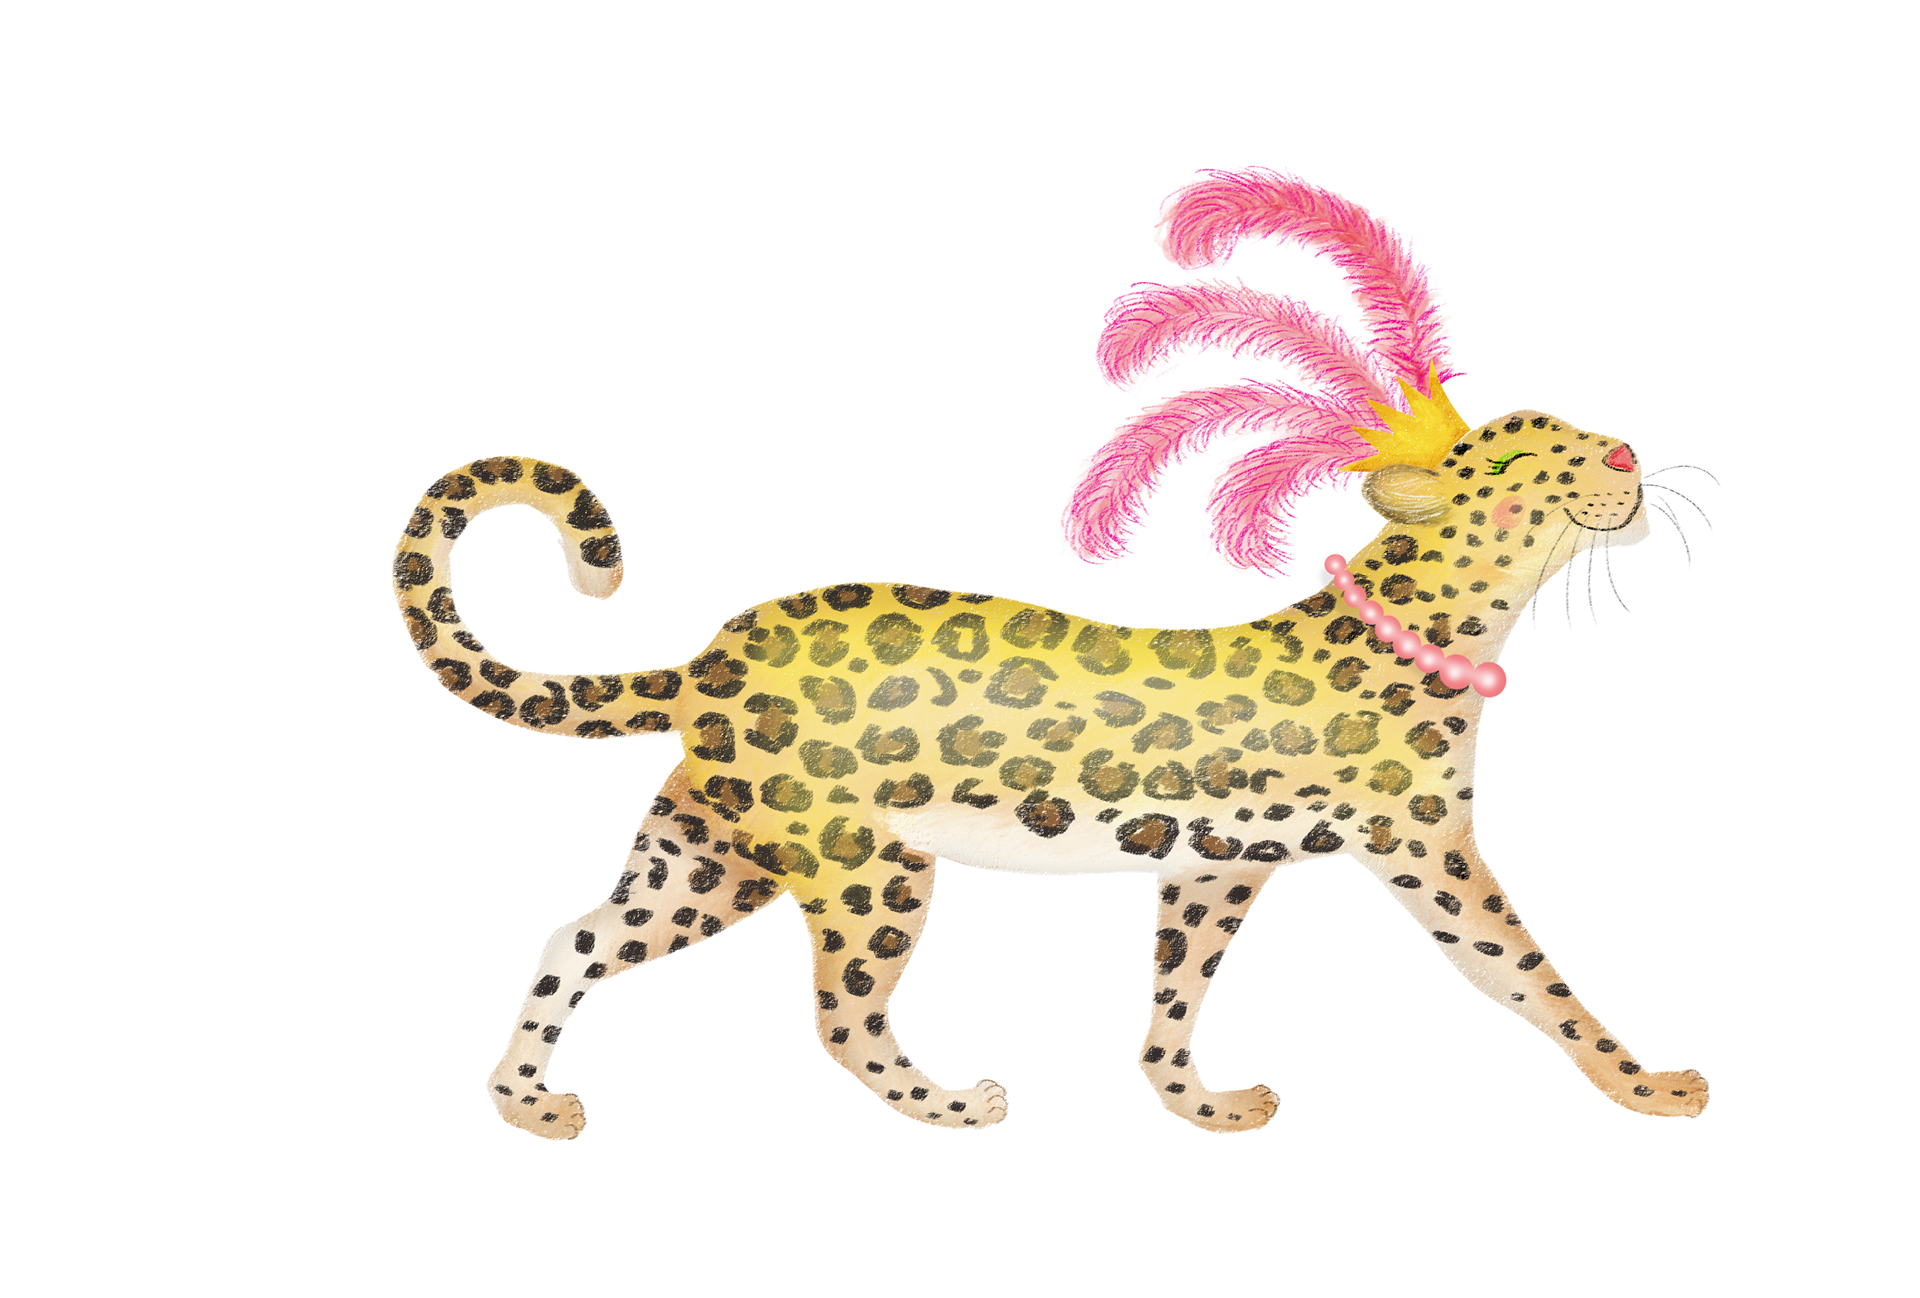 Glamorous leopard wearing a crown and pink feather on her head